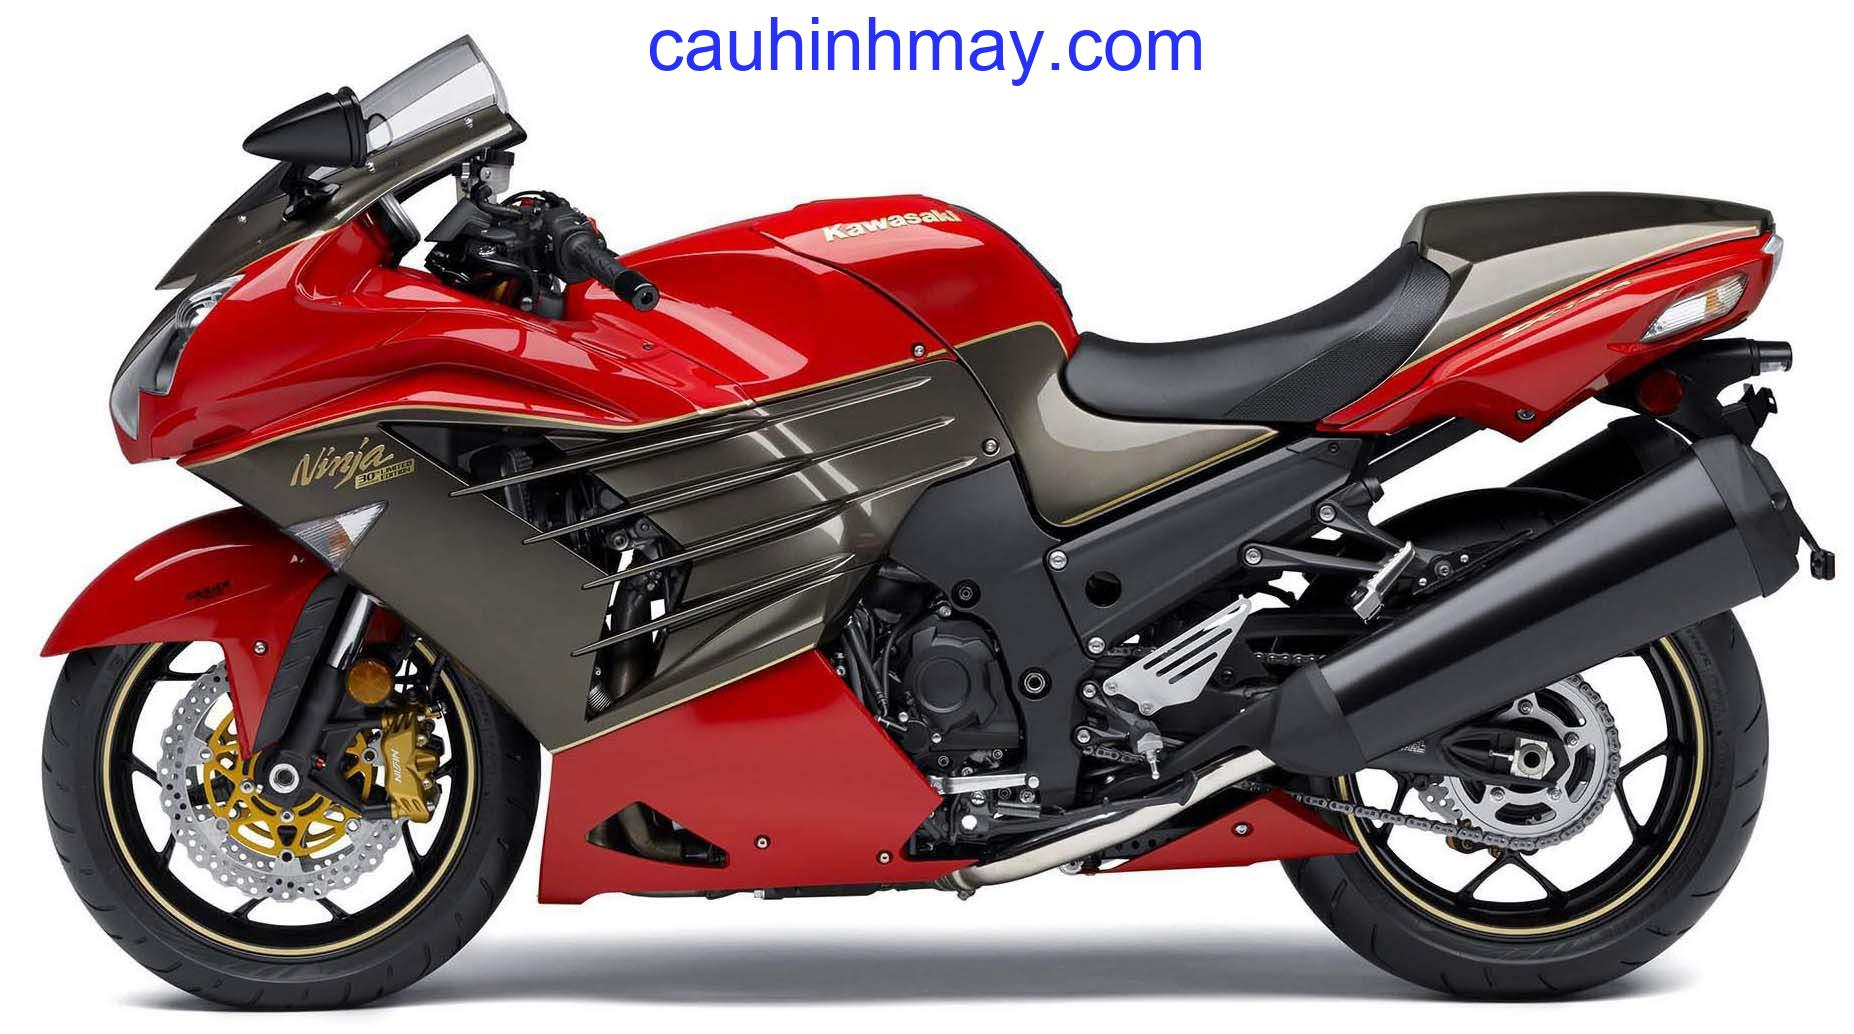 KAWASAKI ZX-14 30TH ANNIVERSERY LIMITED EDITION - cauhinhmay.com